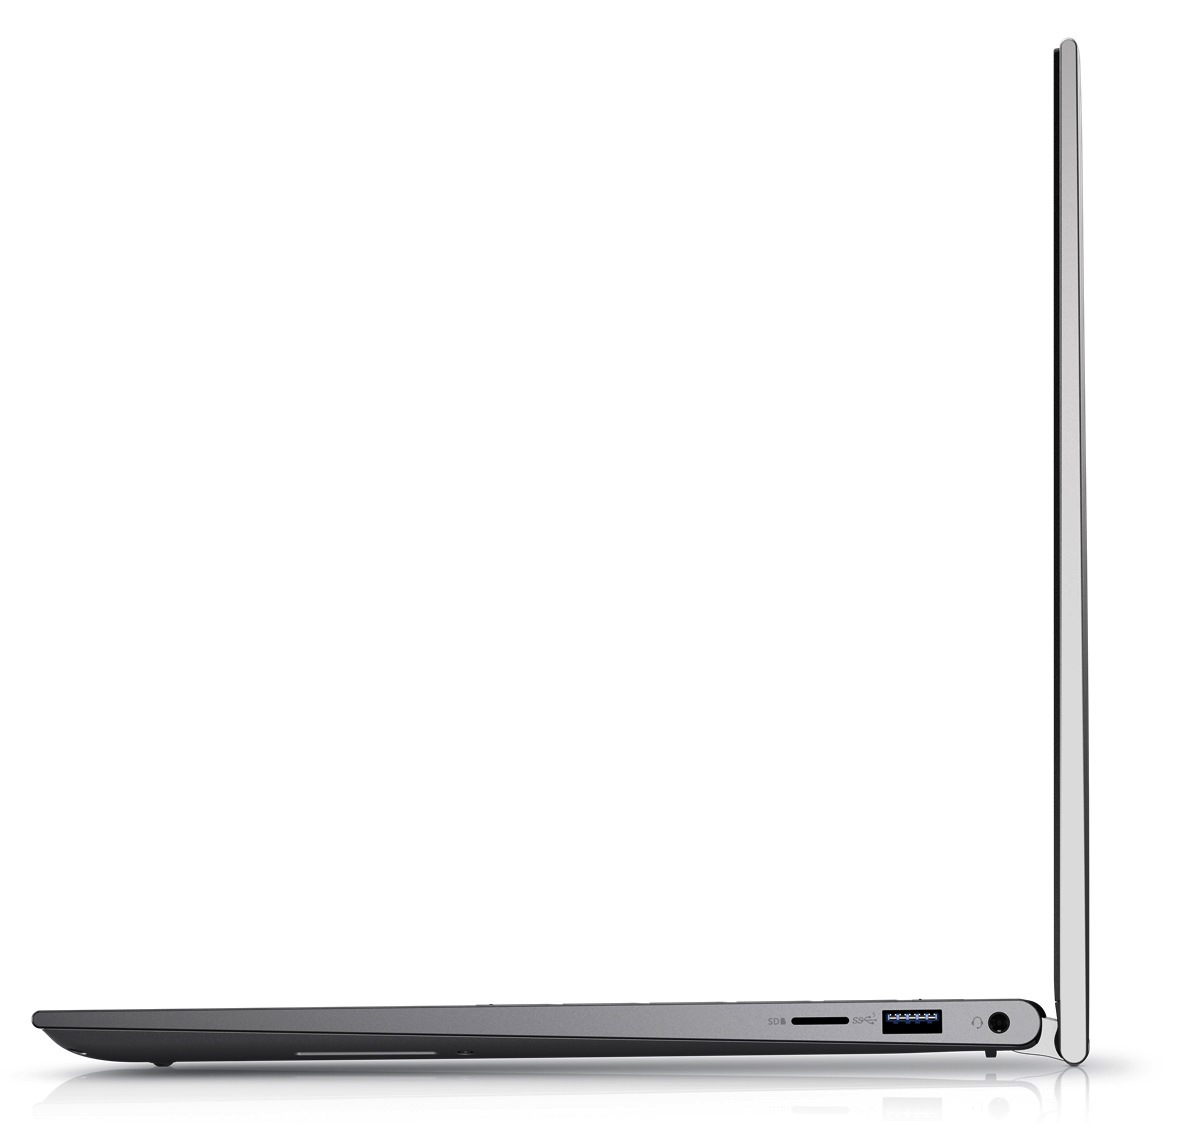 Dell Inspiron 5410 2 in 1 - Right Side View